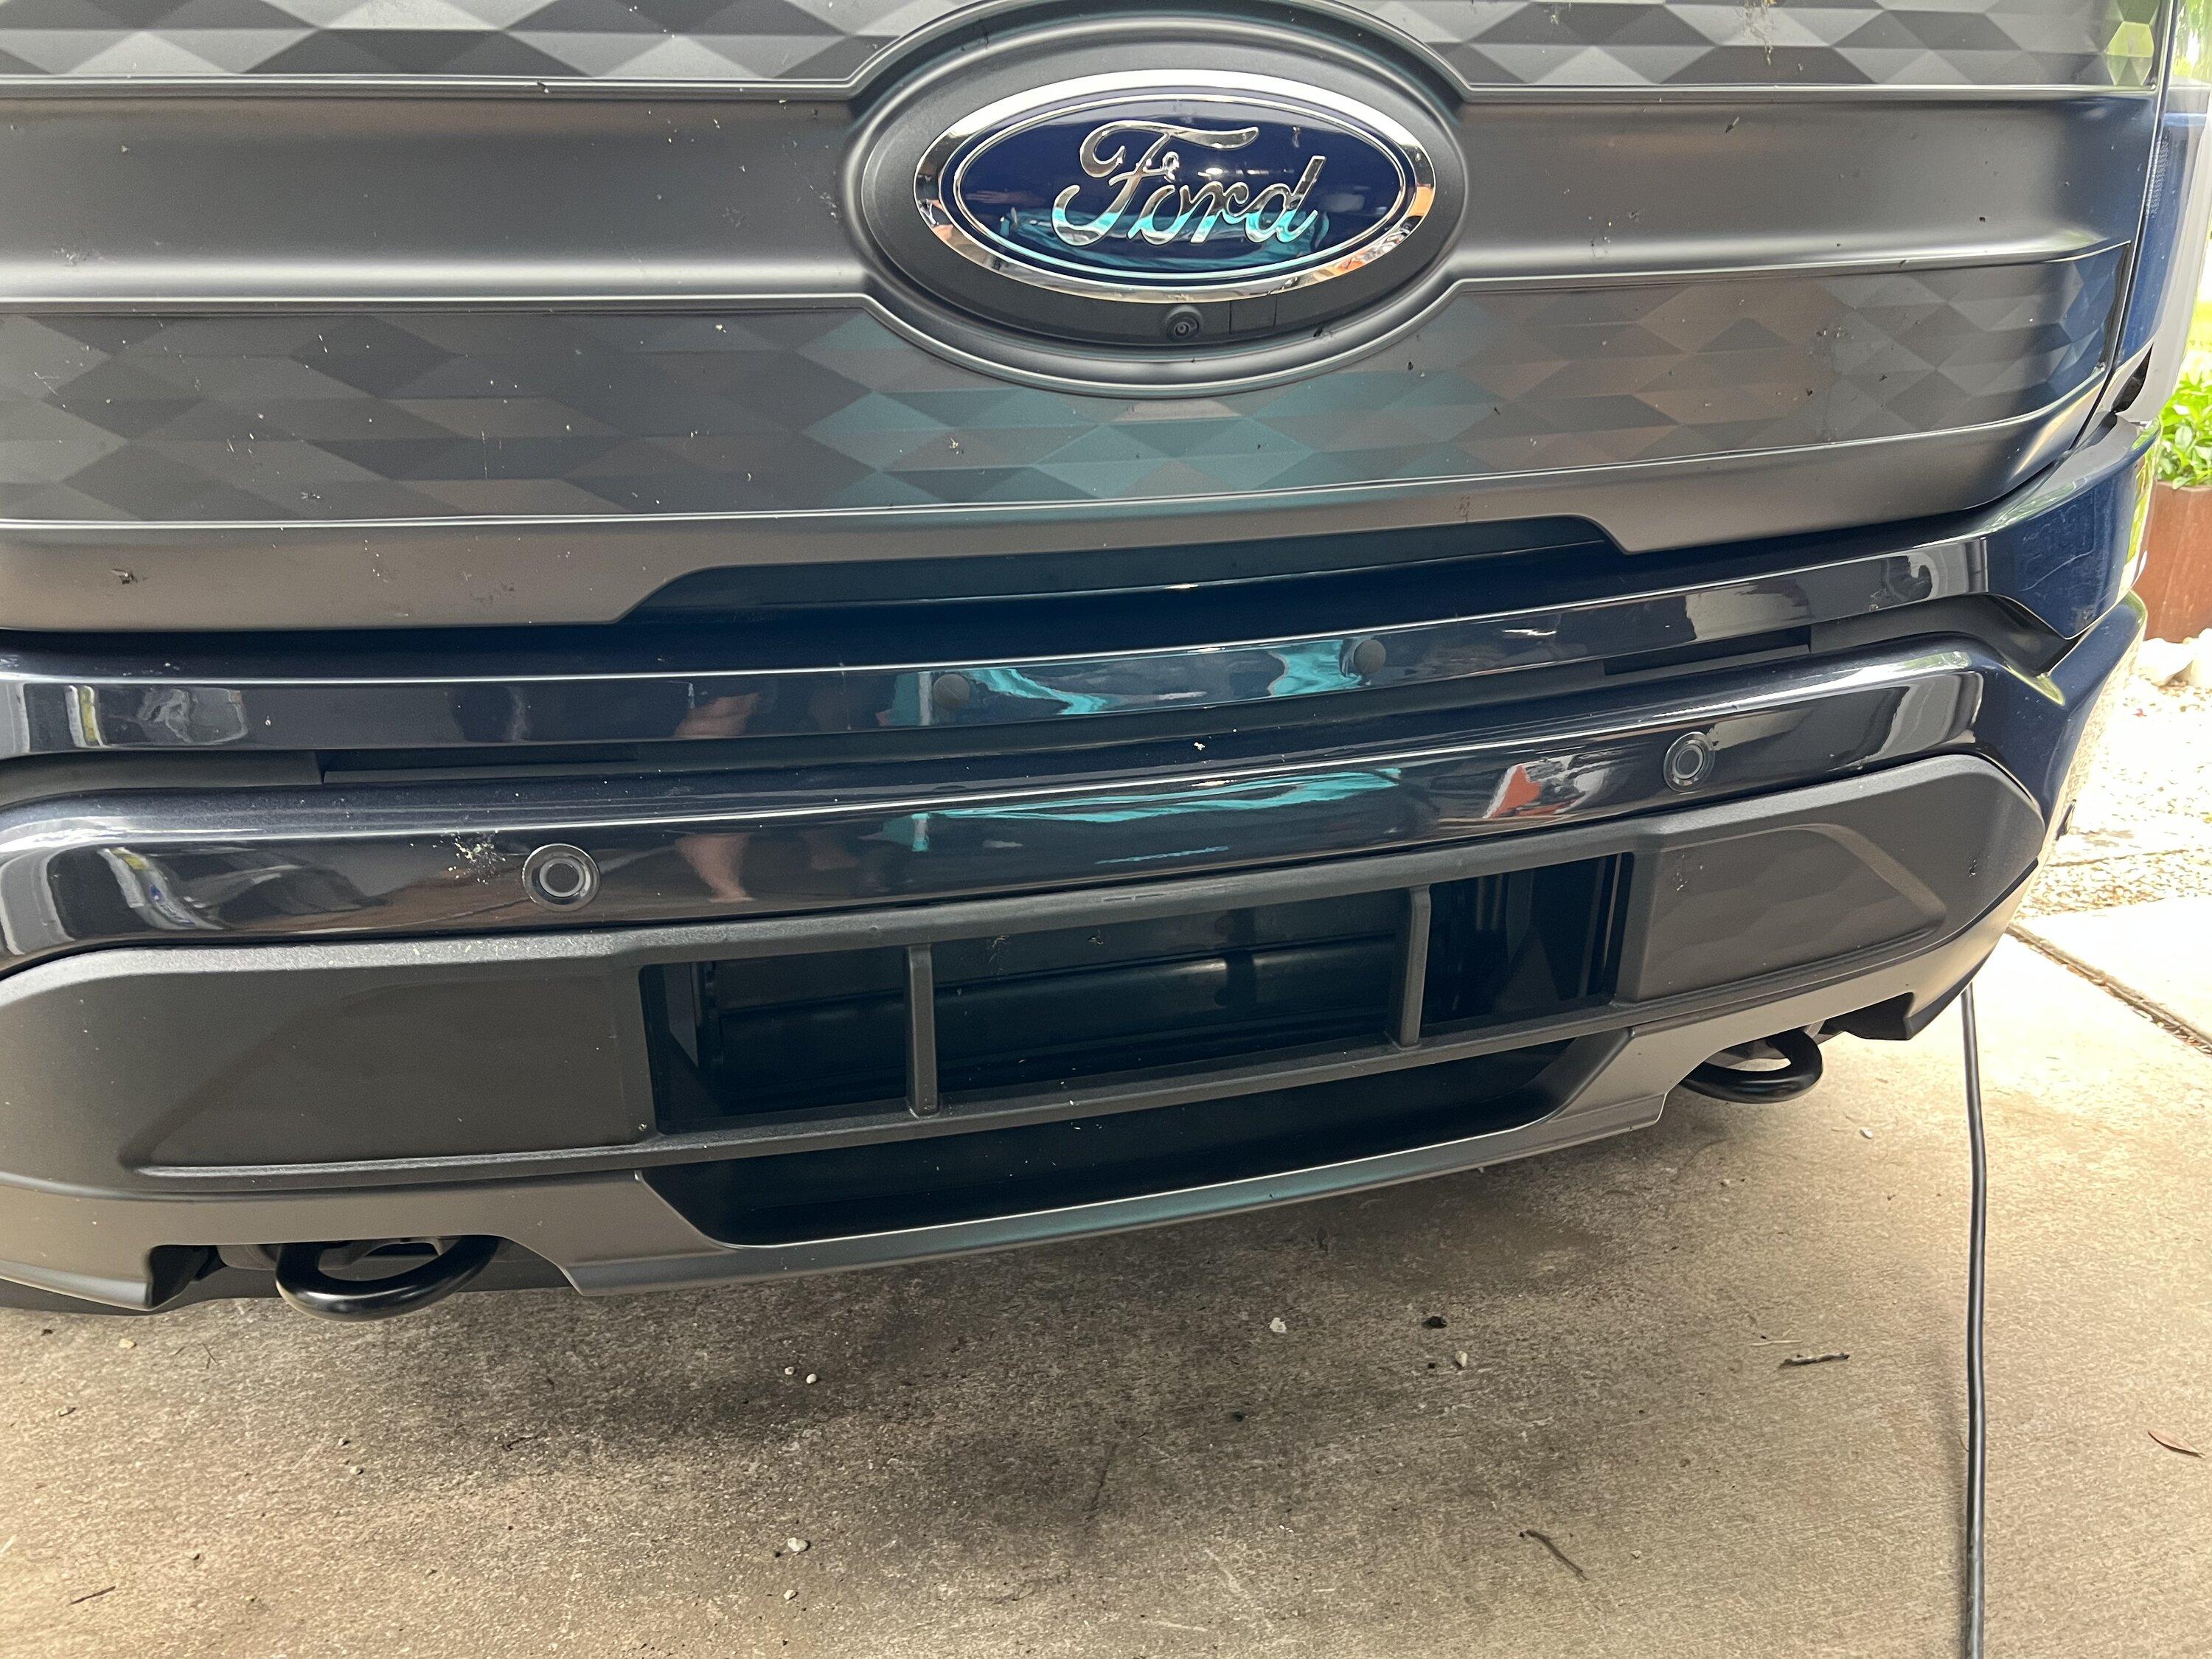 Removing the front license bracket?  Ford Lightning Forum For F-150  Lightning EV Pickup: News, Owners, Discussions, Community